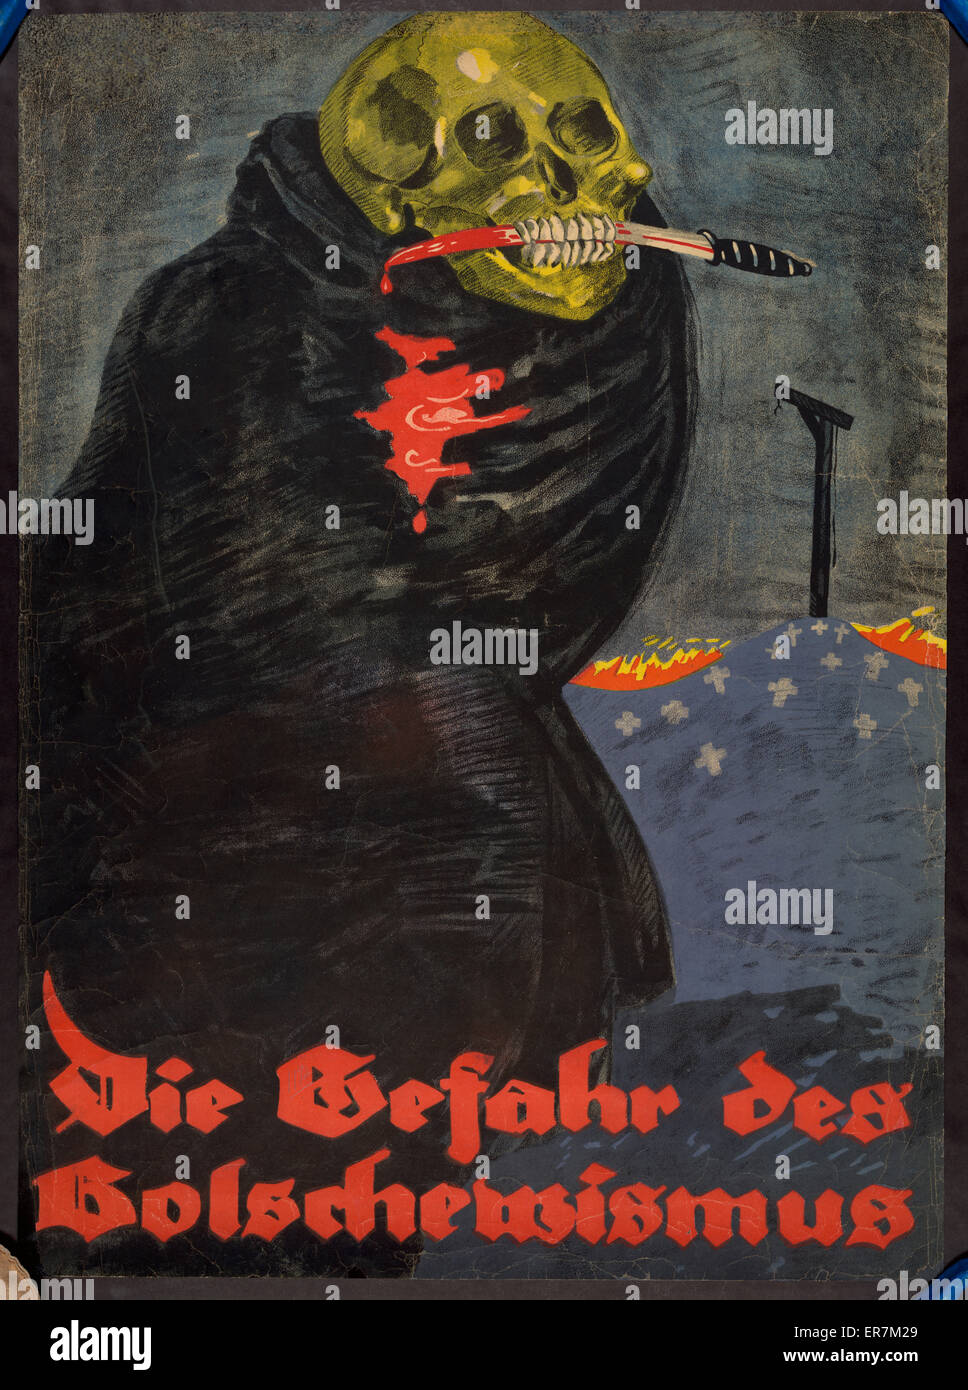 Die Gefahr des Bolschewismus. Poster shows a skeleton, wrapped in a black cloak, with a bloody knife held in its teeth. In the background a hill of crosses on top of which is a gallows. Text: The danger of Bolshevism. Date 1919. Stock Photo